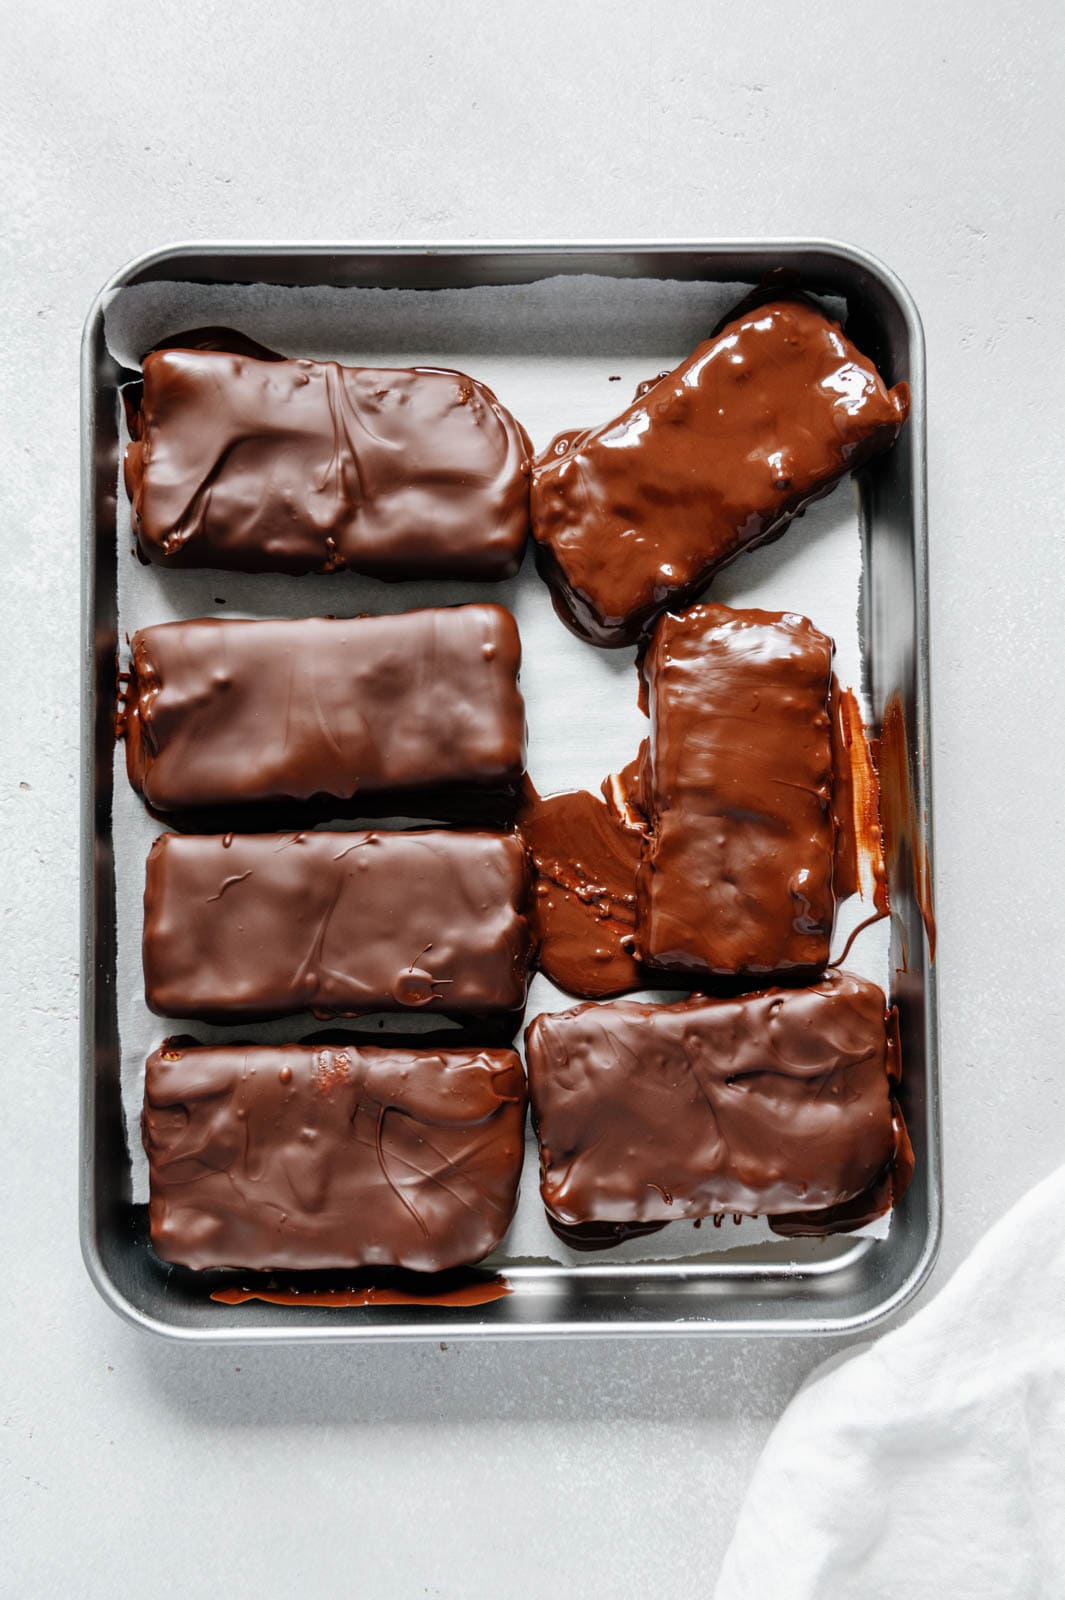 Butterfingers bars dipped in chocolate on a baking sheet ready to set.